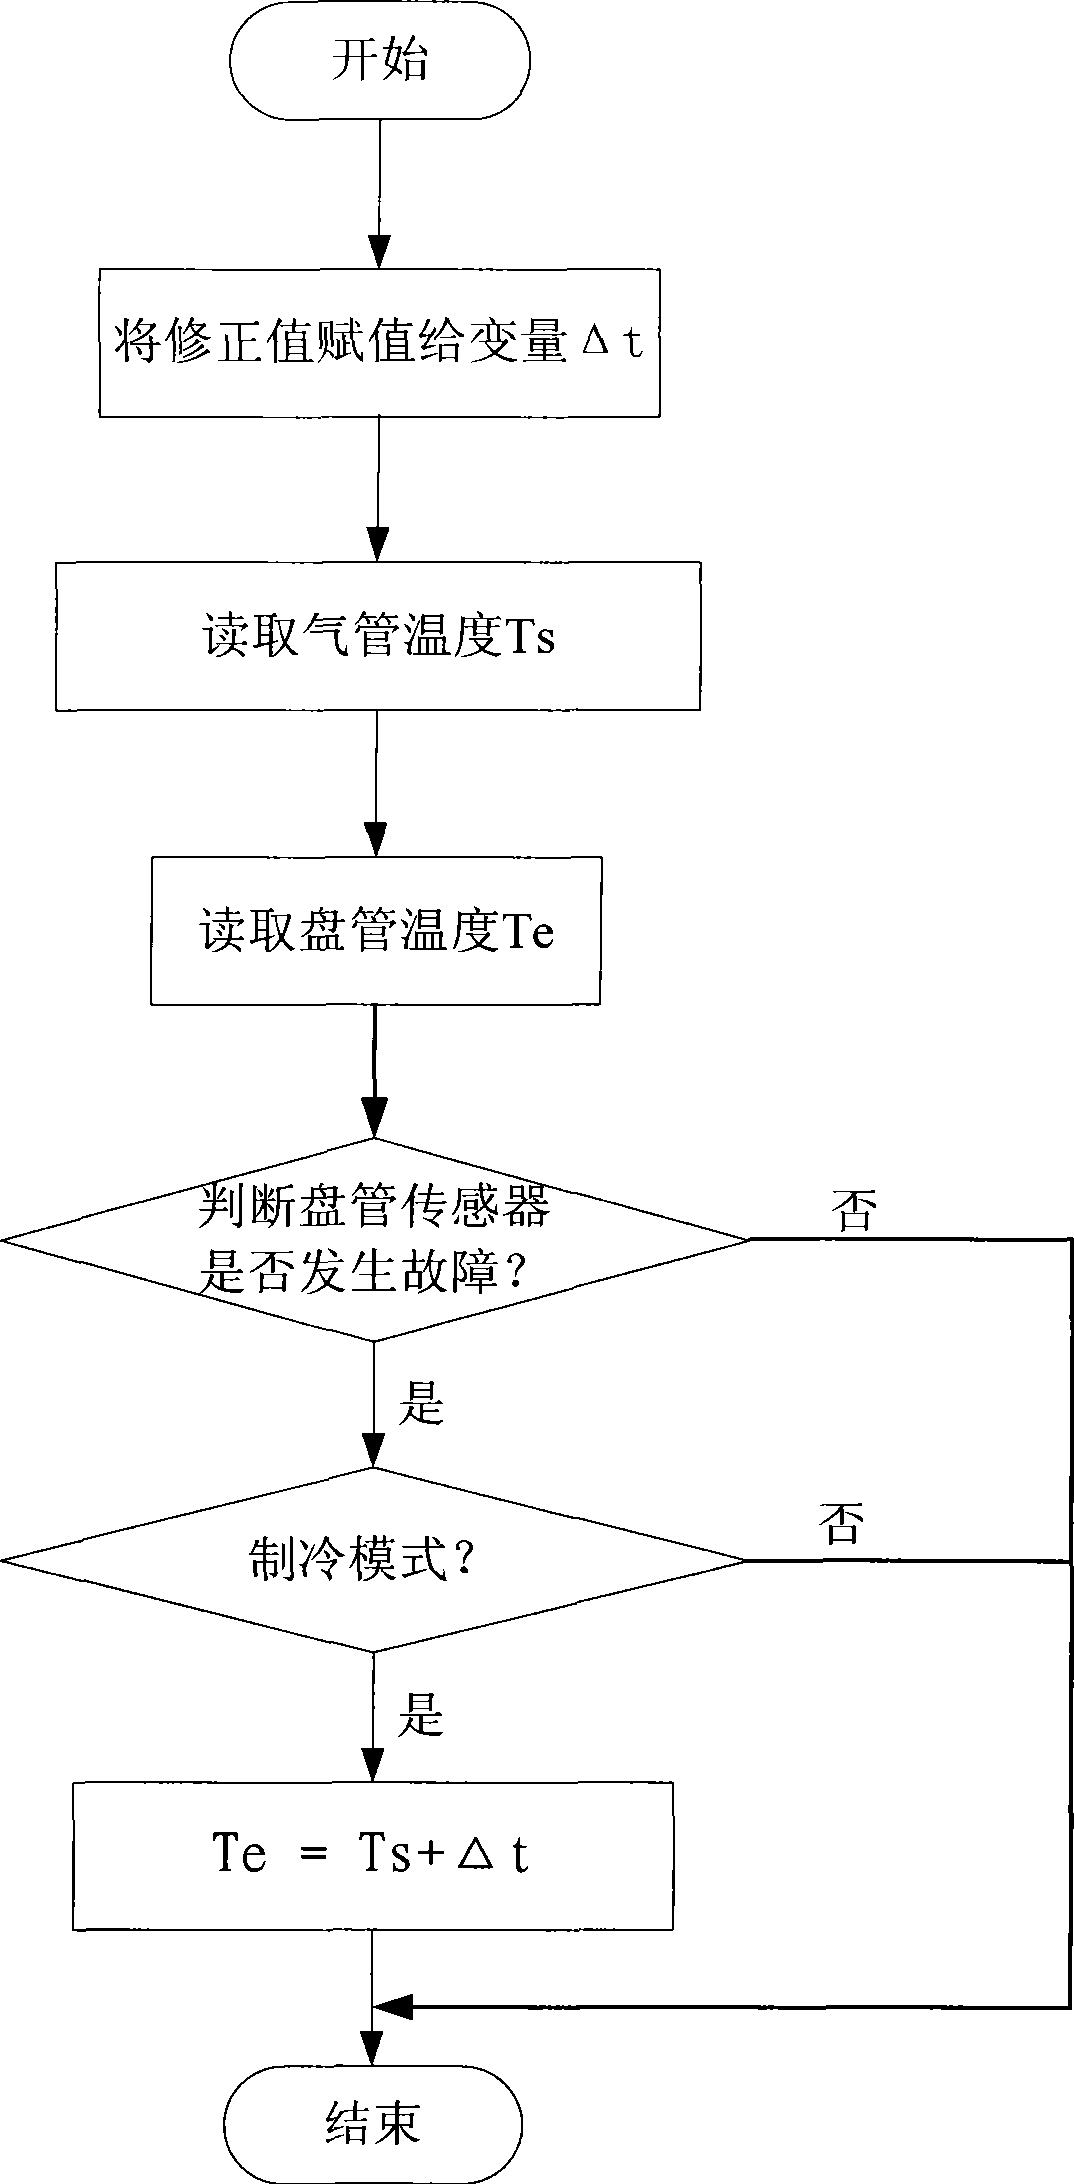 Substitution control method for air conditioner fault sensor